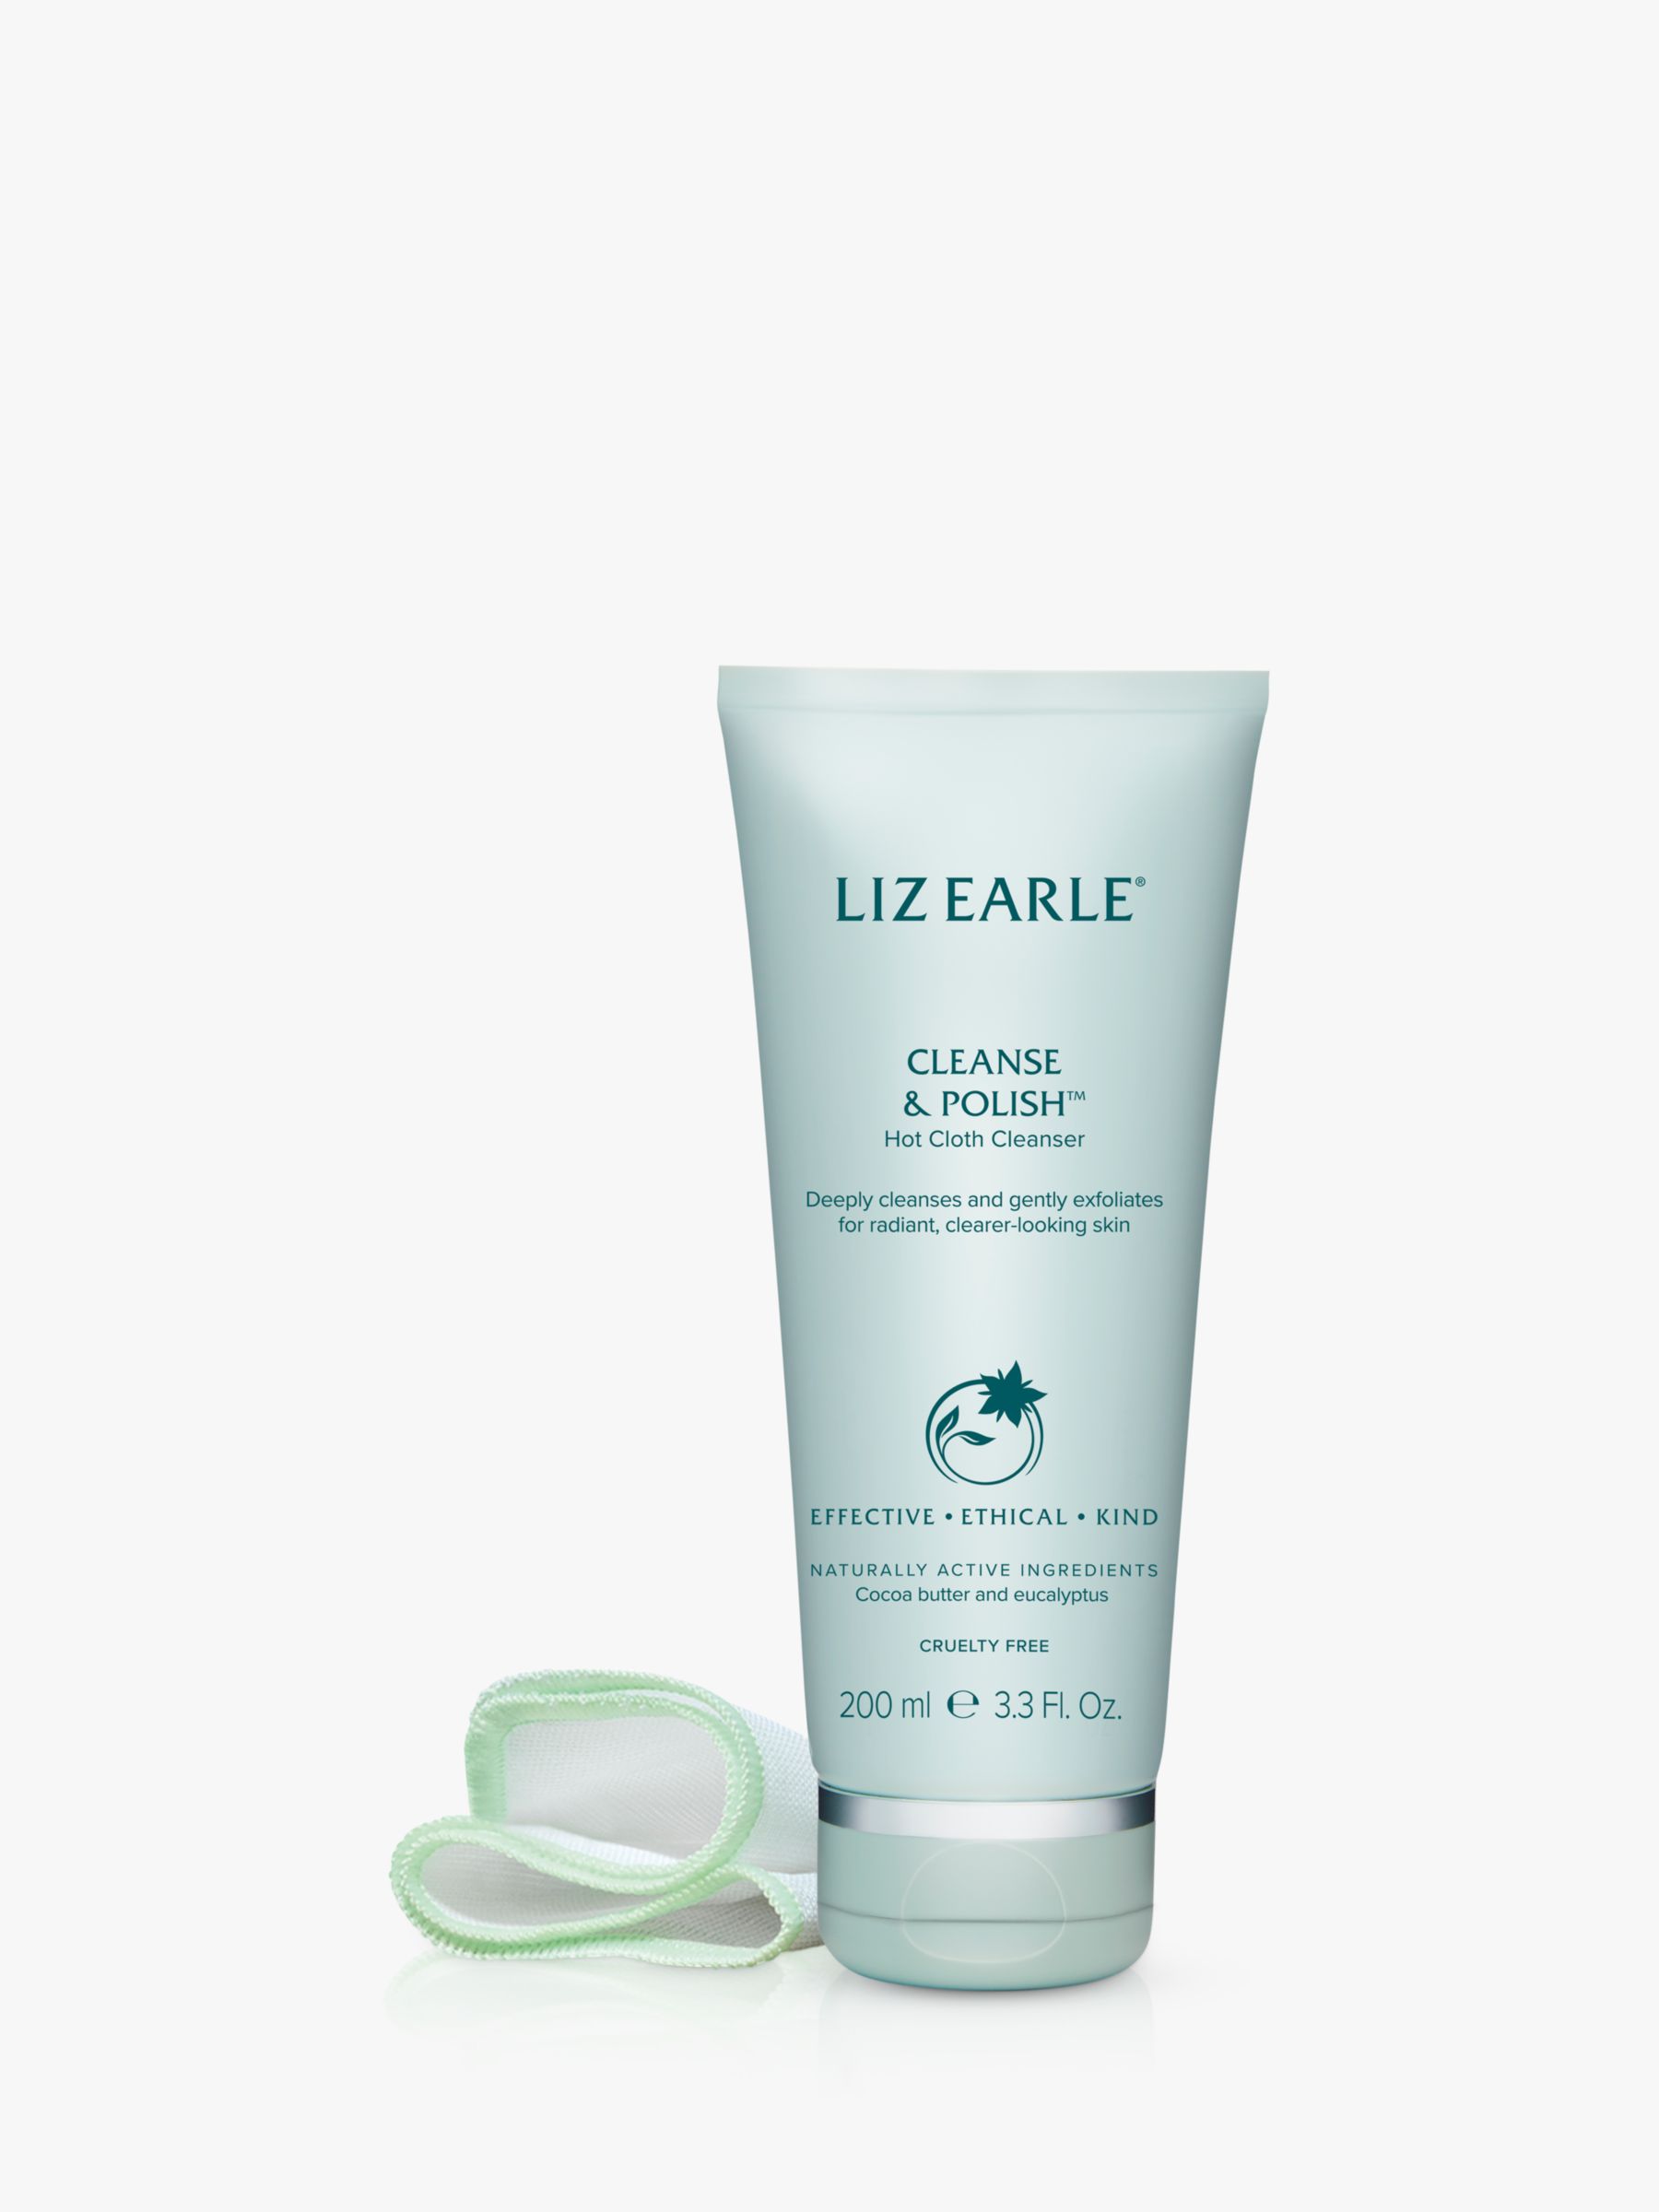 Liz Earle Cleanse & Polish™ Hot Cloth Cleanser, 200ml with 2 Cotton Cloths 2